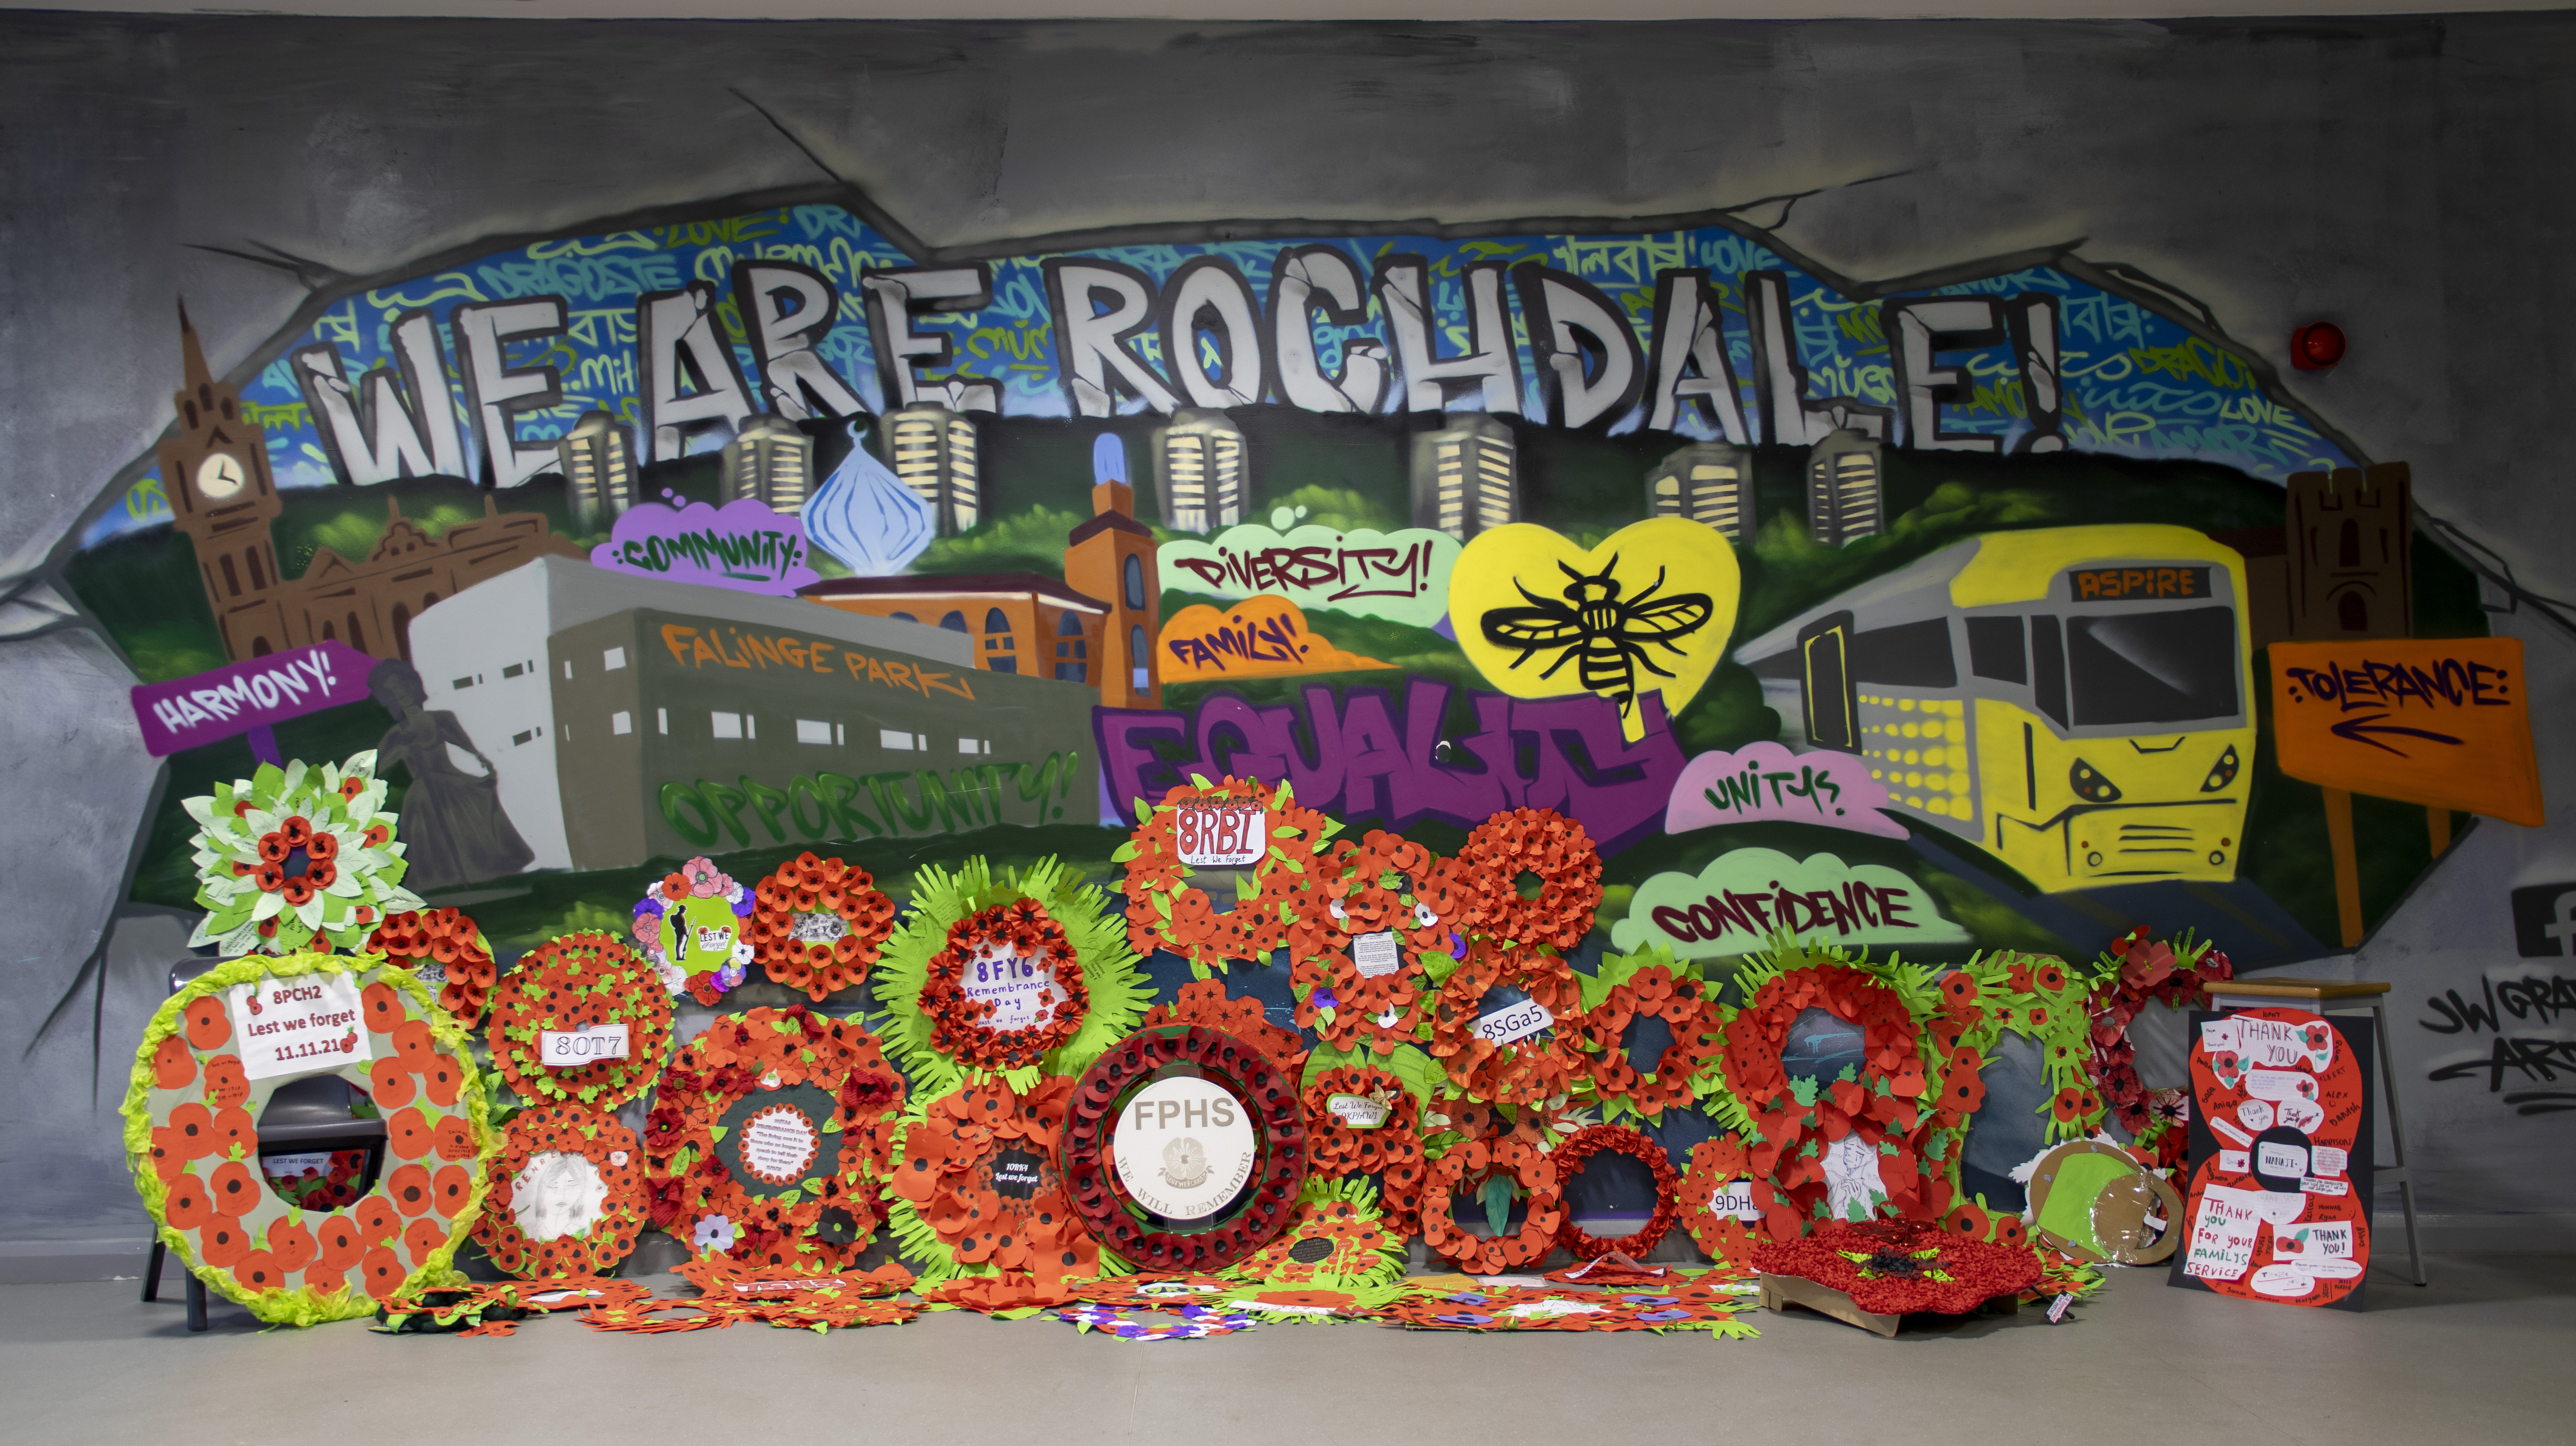 Picture of graffiti wall saying We are Rochdale, with poppies for remembrance at the base